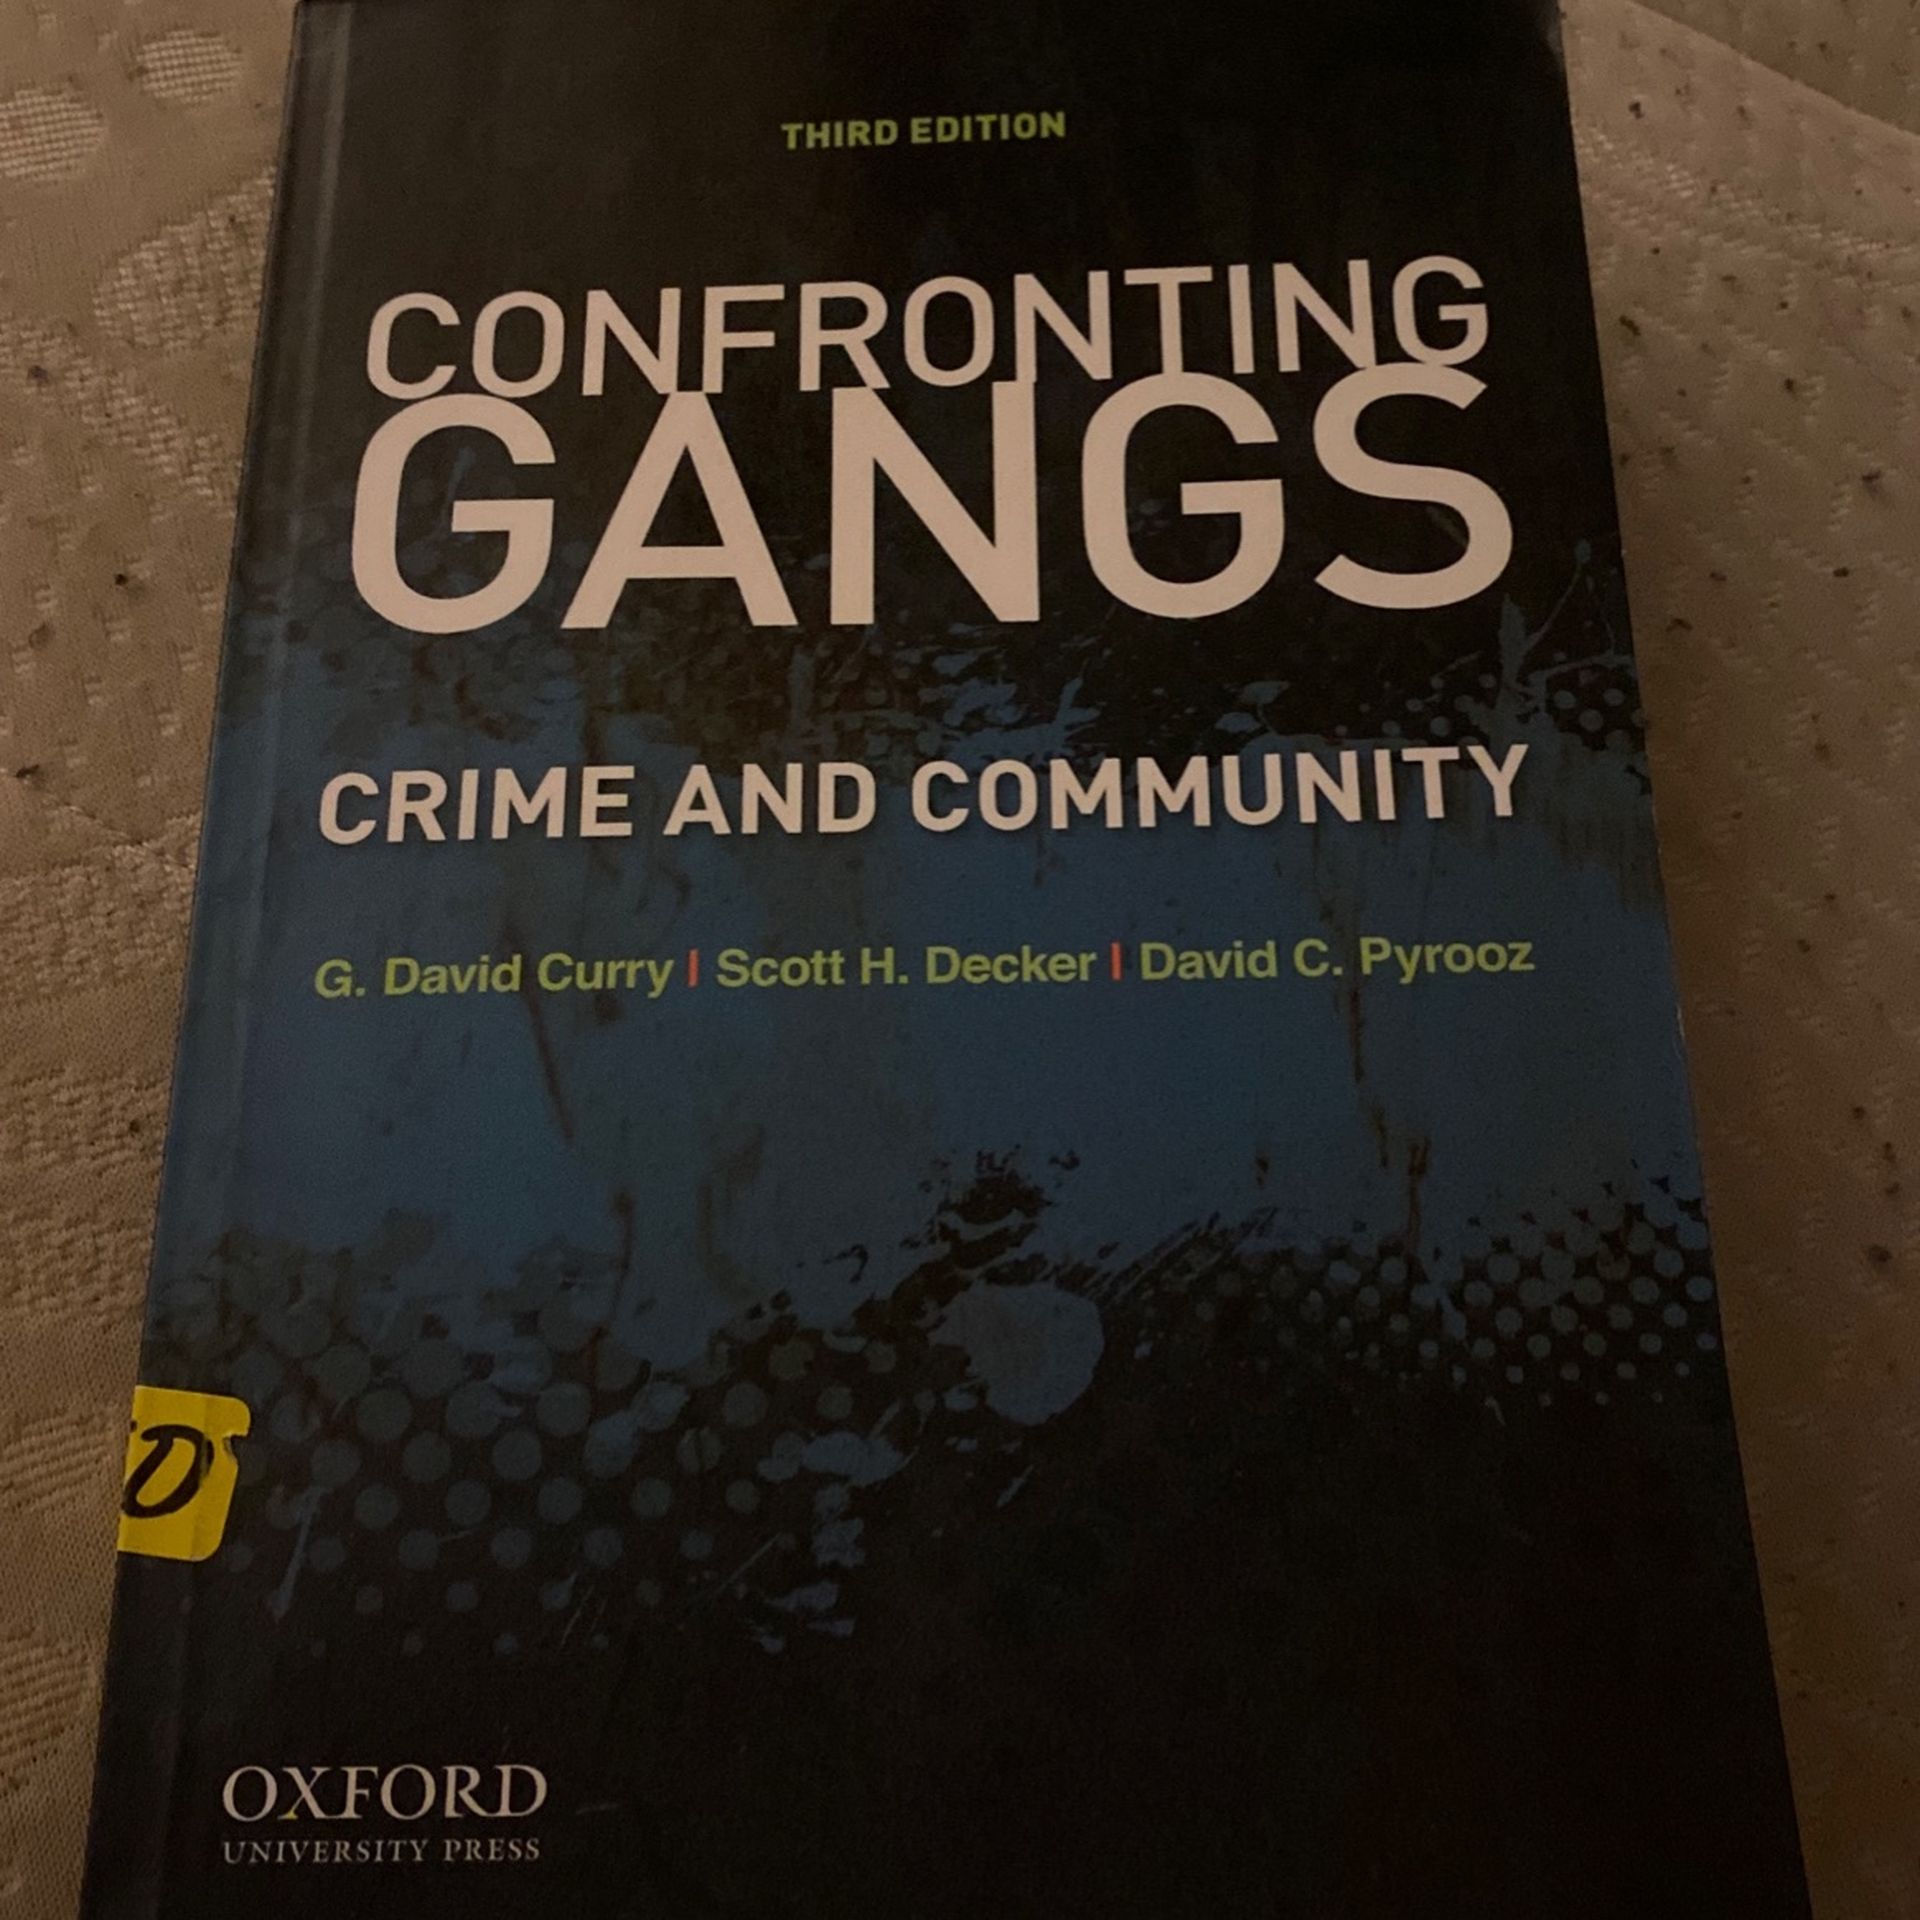 Confronting gangs